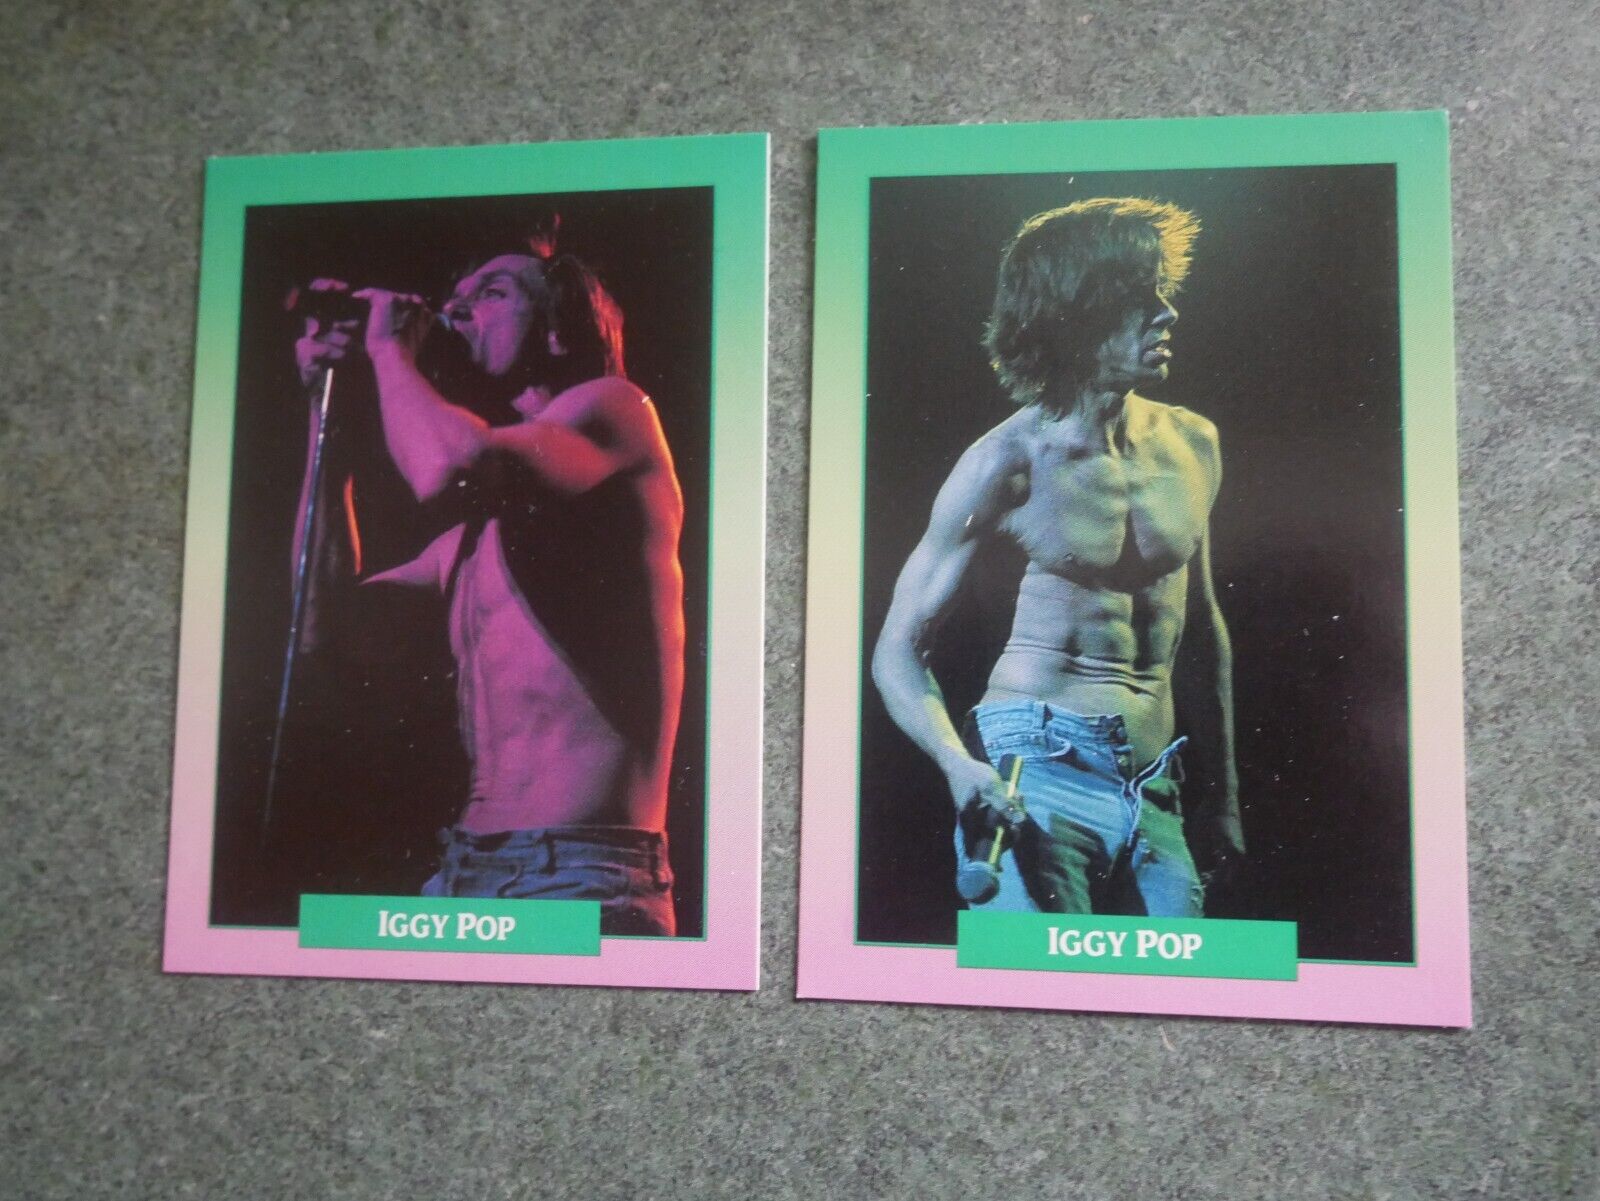 IGGY POP 1991 COLLECTION TRADING CARDS x2 FROM ROCKCARDS BROCKUM